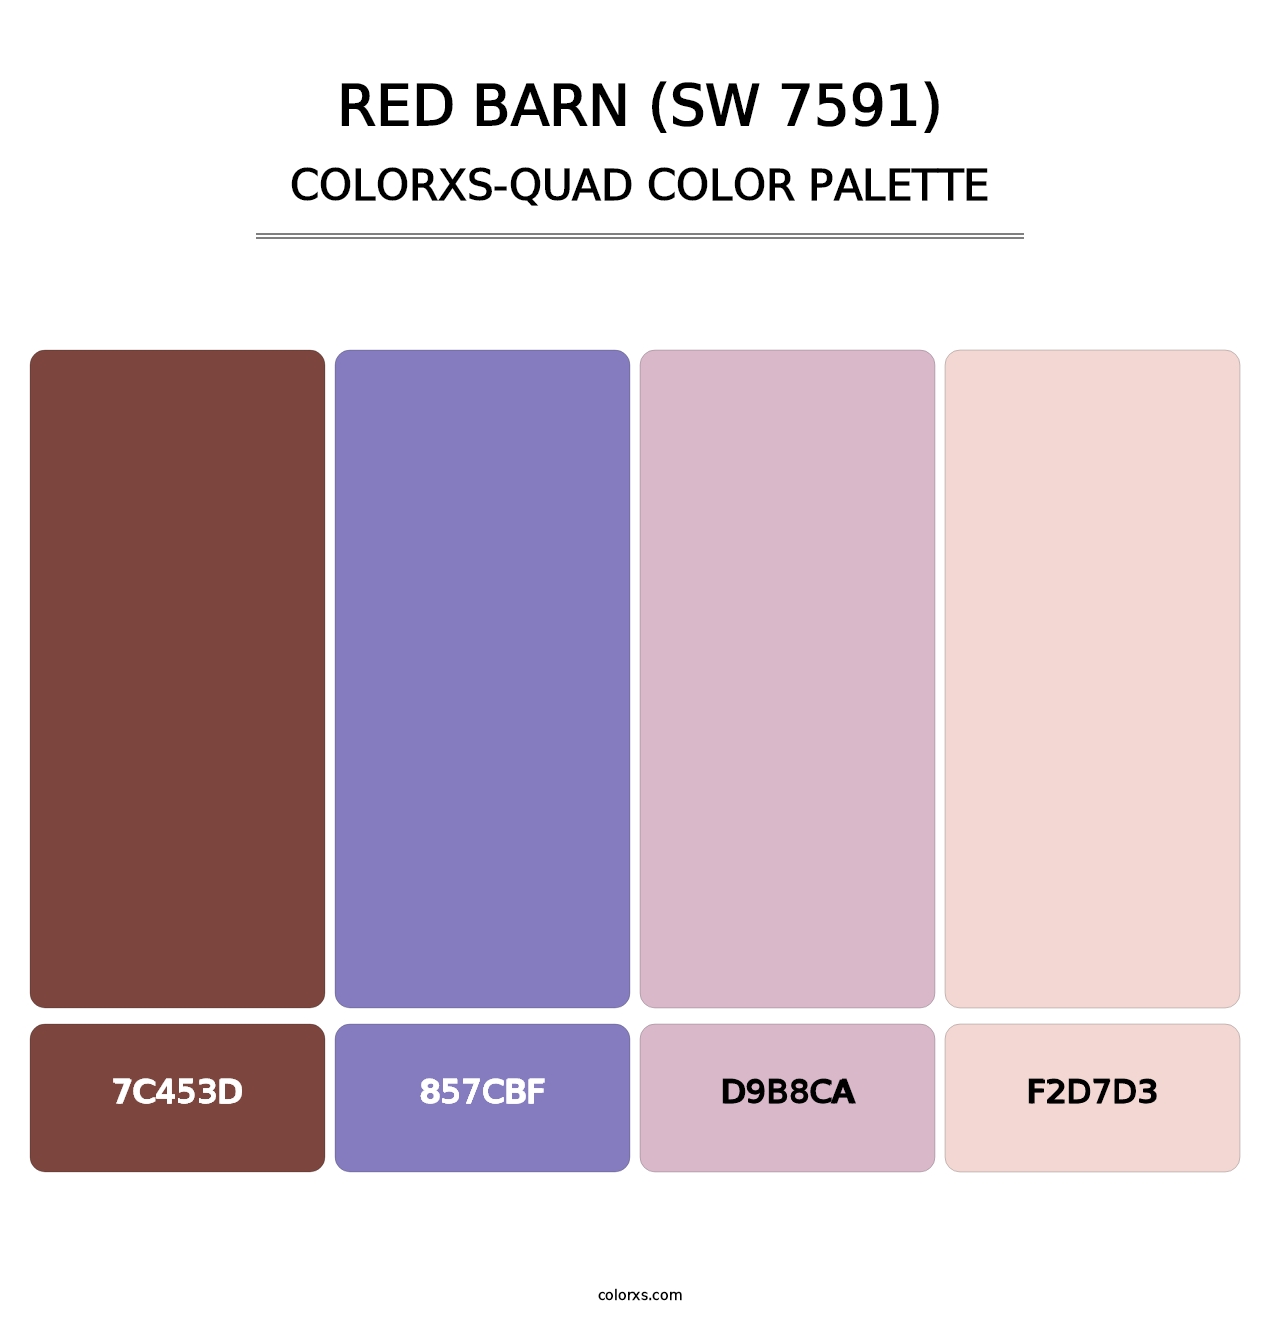 Red Barn (SW 7591) - Colorxs Quad Palette